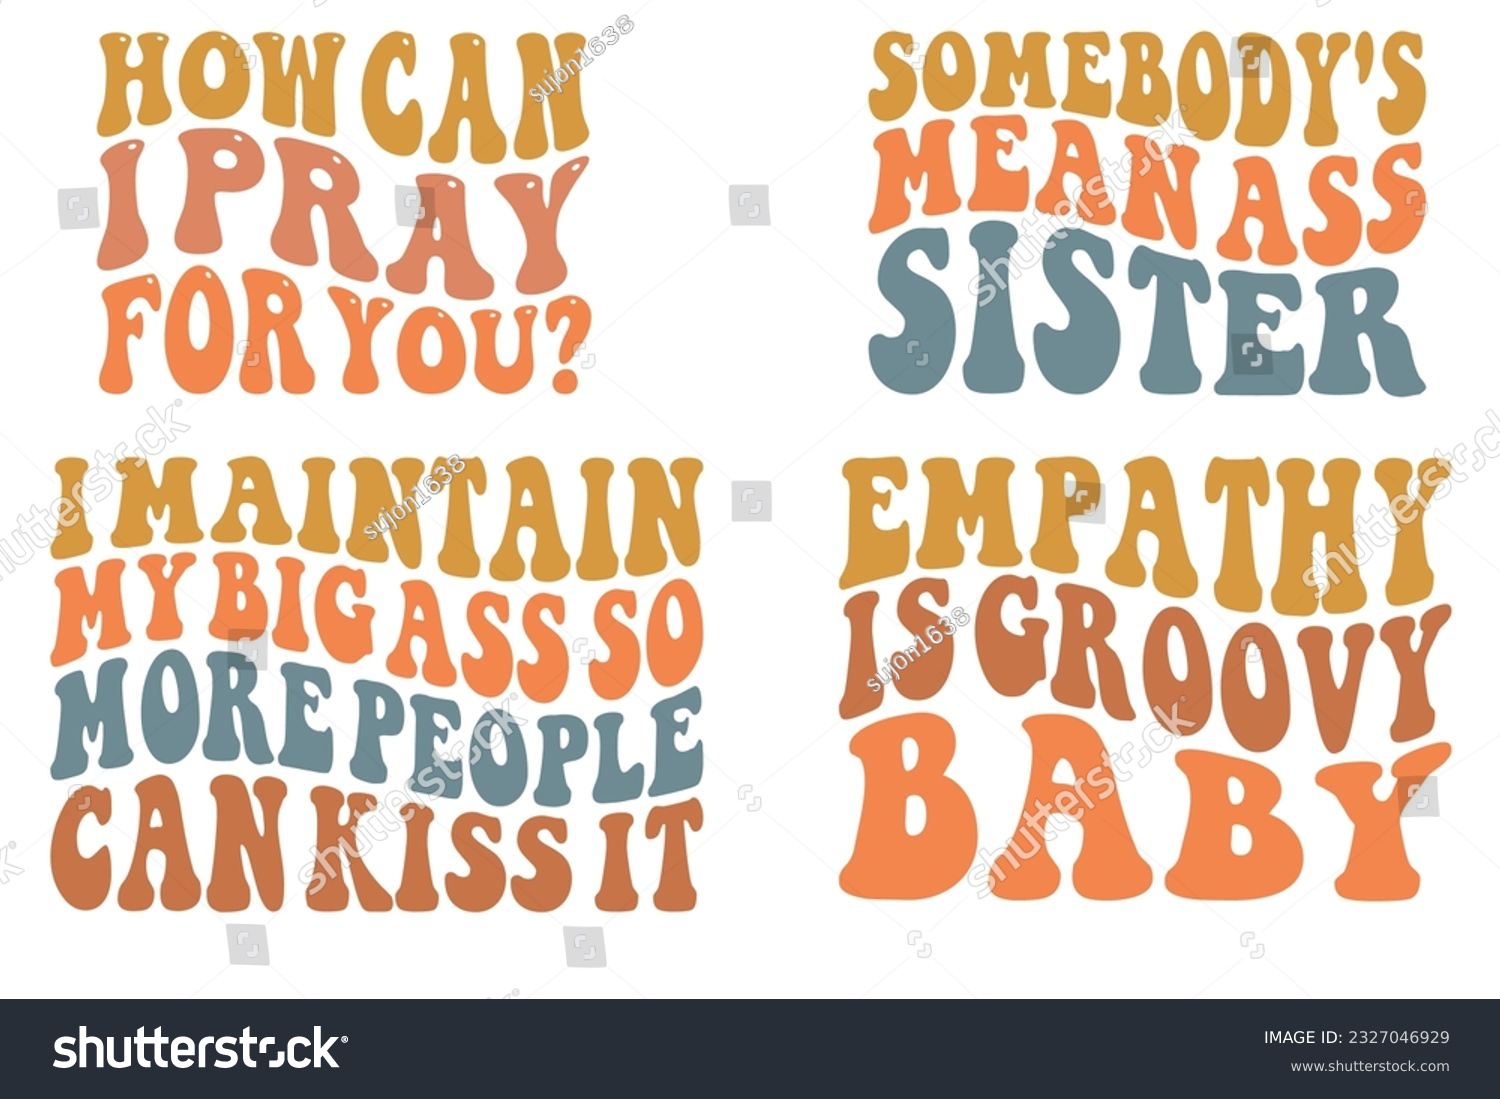 SVG of How Can I Pray For You?, Somebody's Mean Ass Sister, I Maintain My Big Ass So More People Can Kiss It, Empathy is groovy baby wavy SVG bundle t-shirt svg